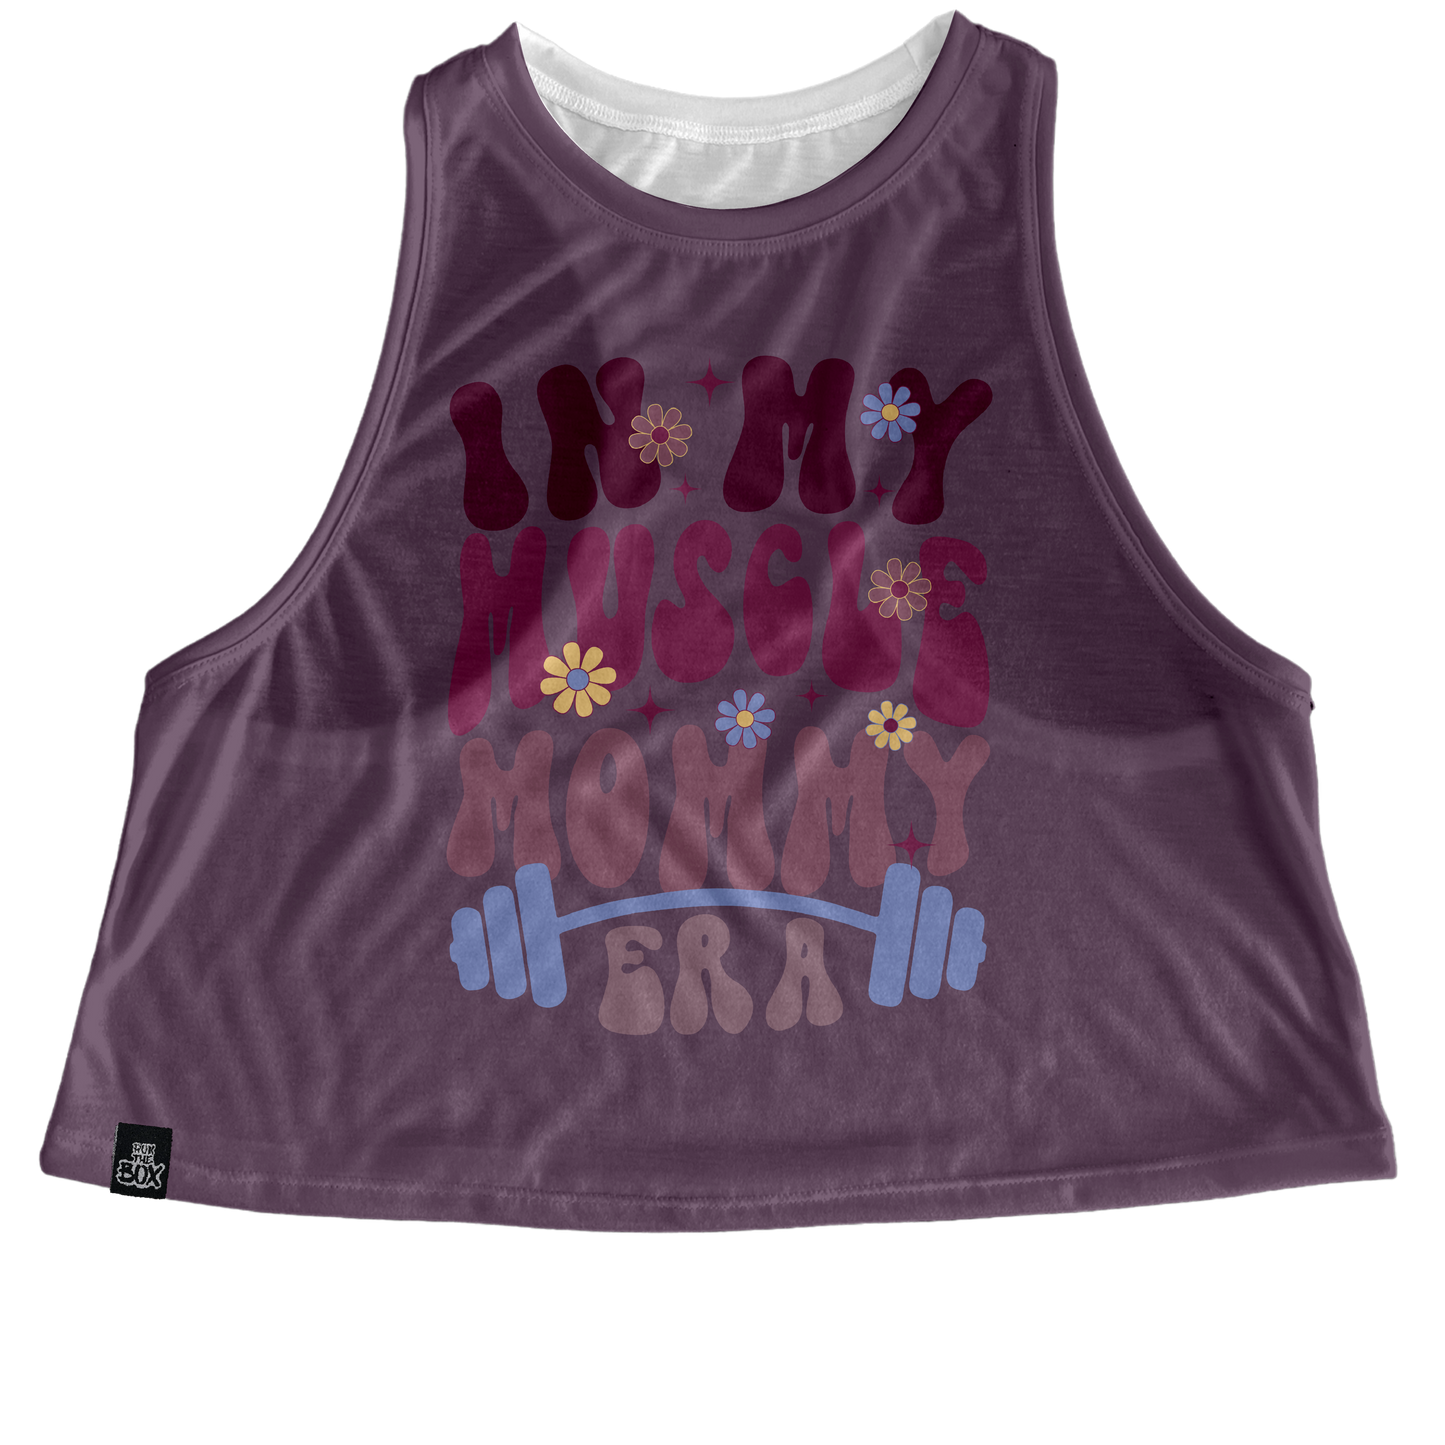 Muscle Mommy (mauve) Tops